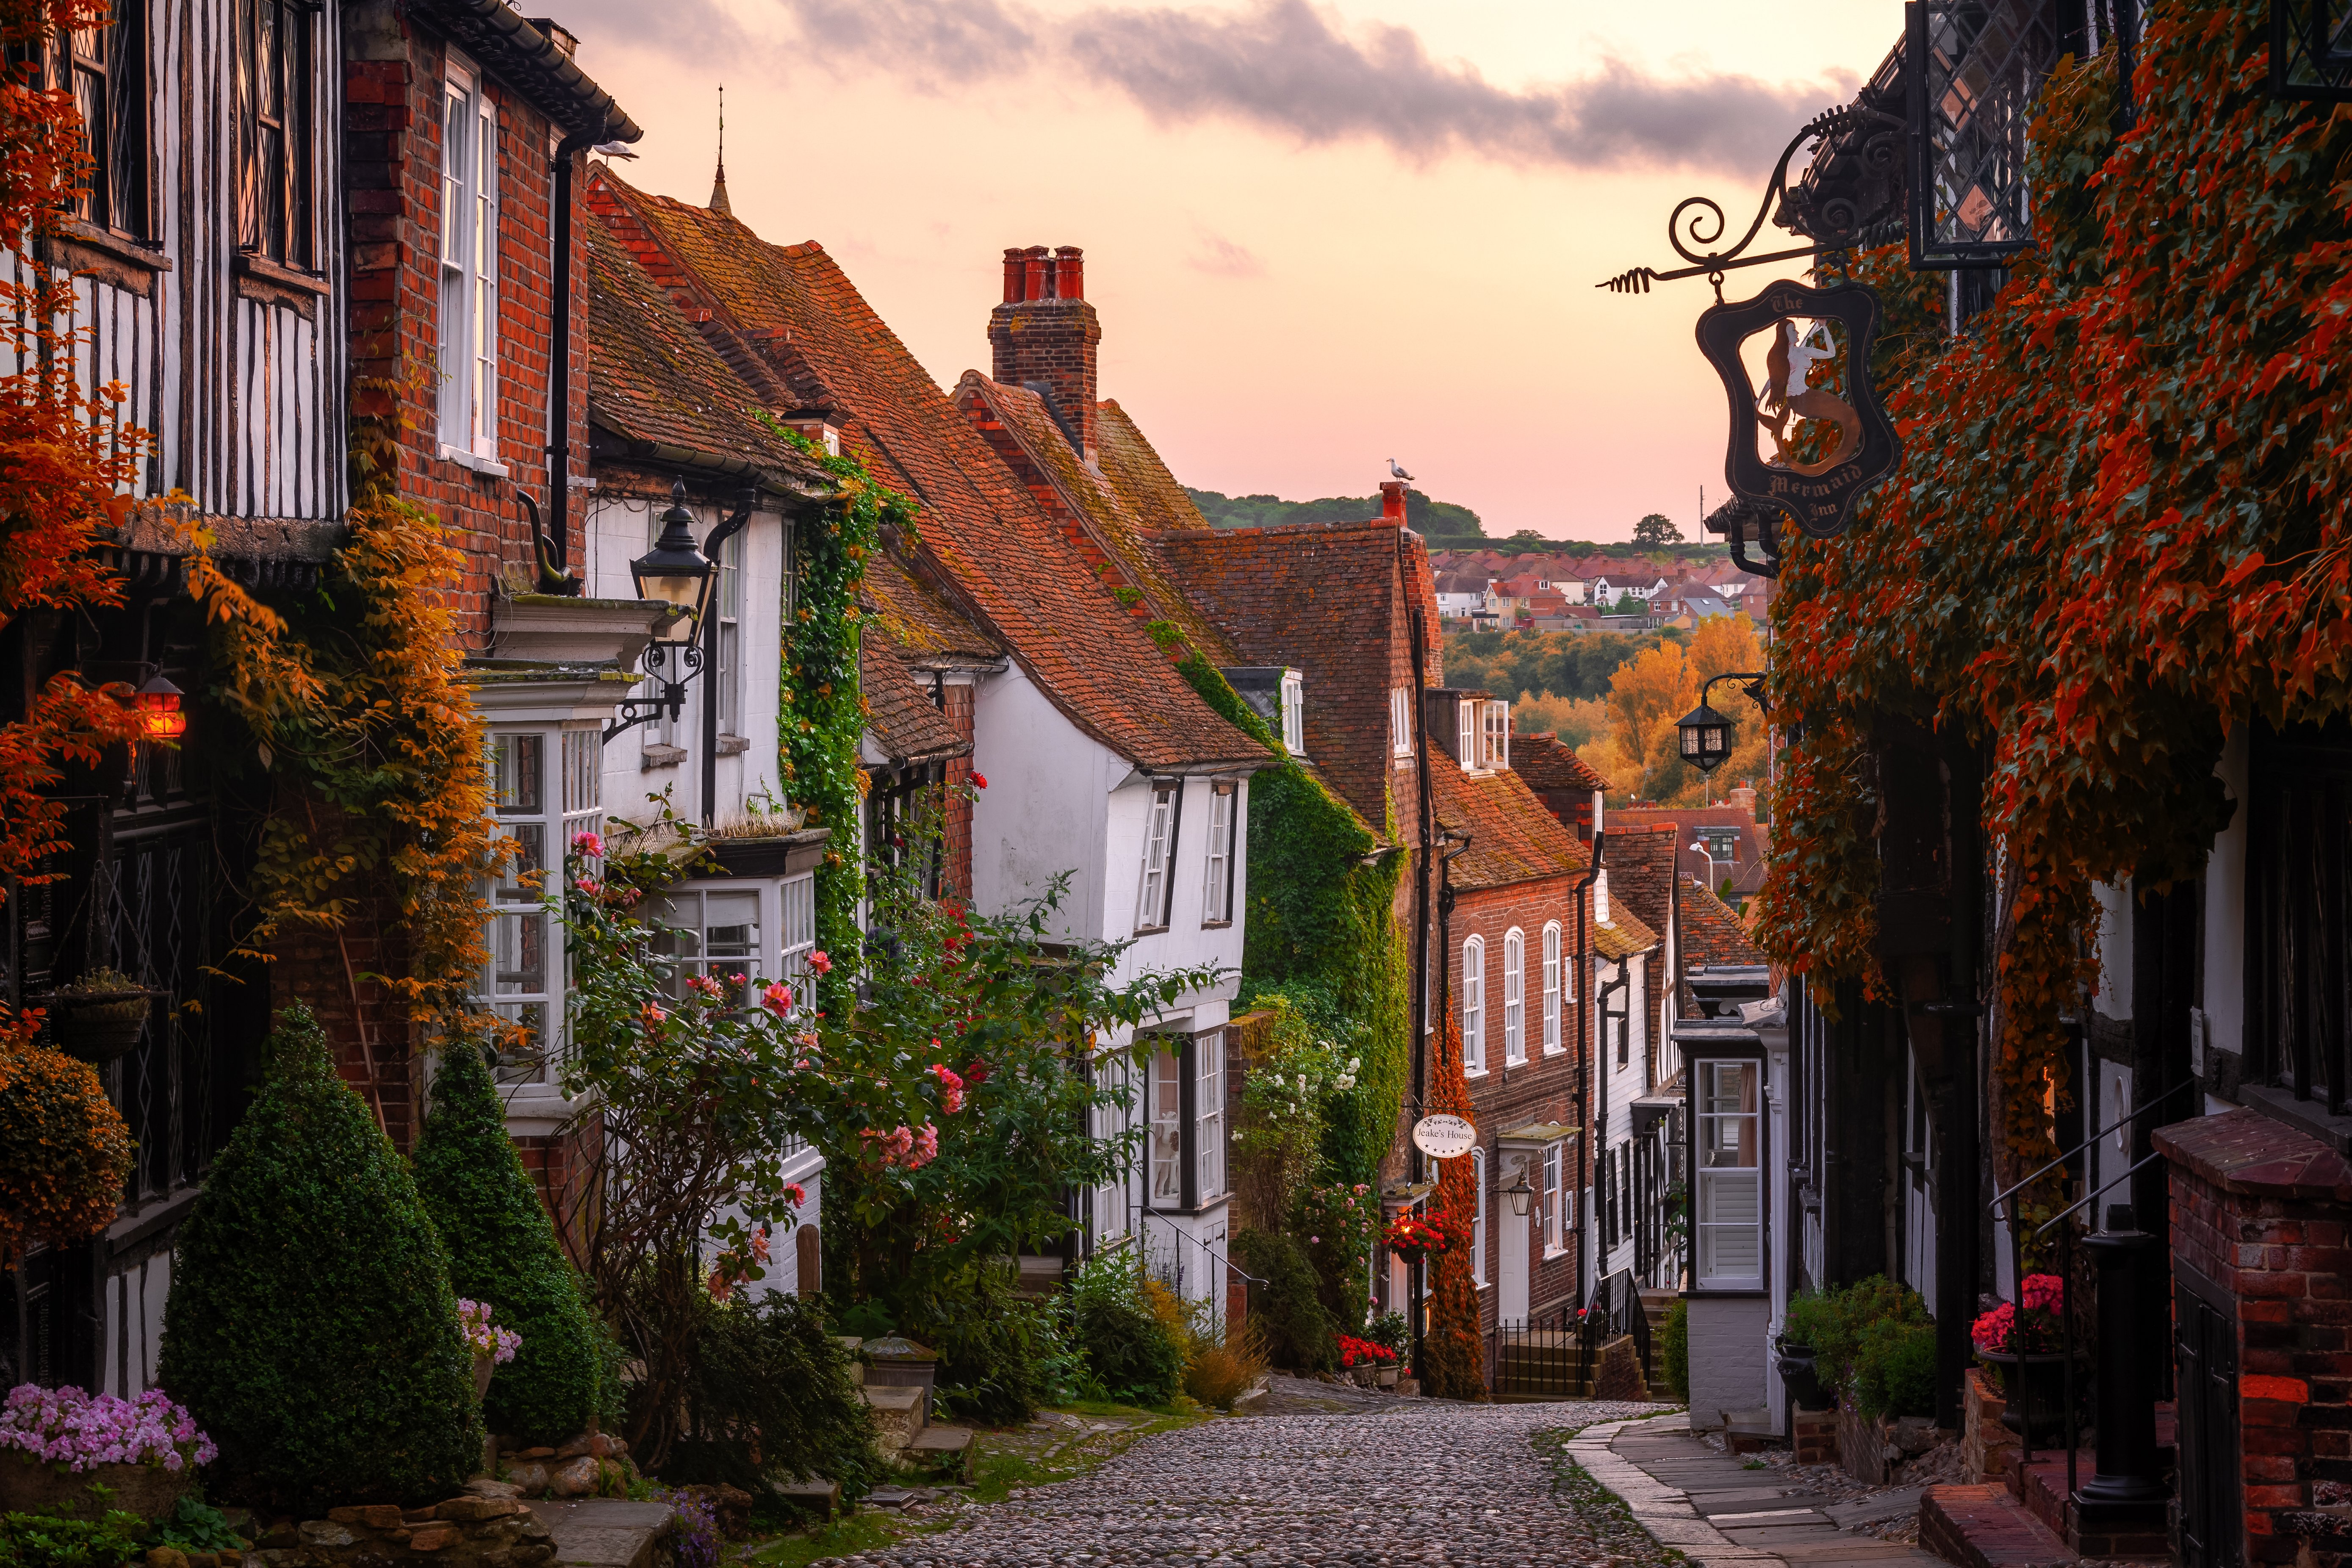 Rue pavée, Mermaid Street, Rye, East Sussex, Angleterre. | Source : Getty Images Getty Images